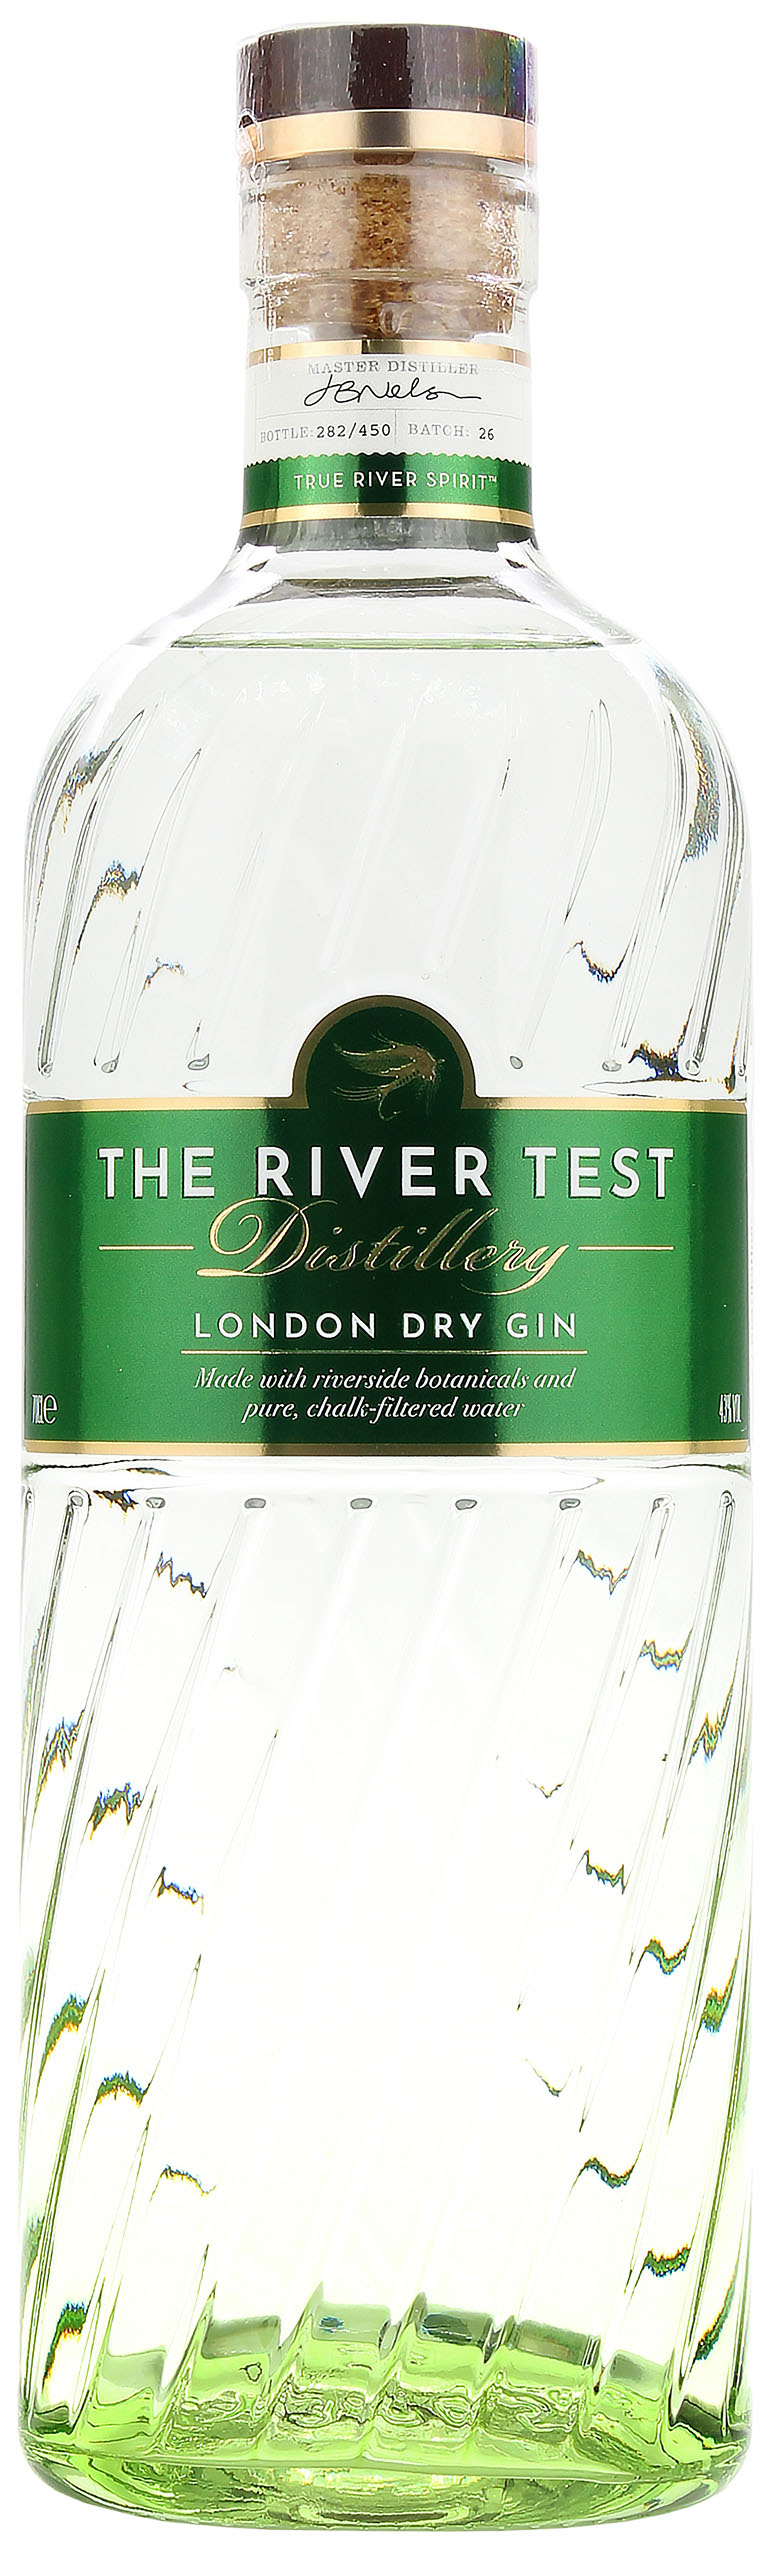 The River Test Distillery London Dry Gin 43.0% 0,7l